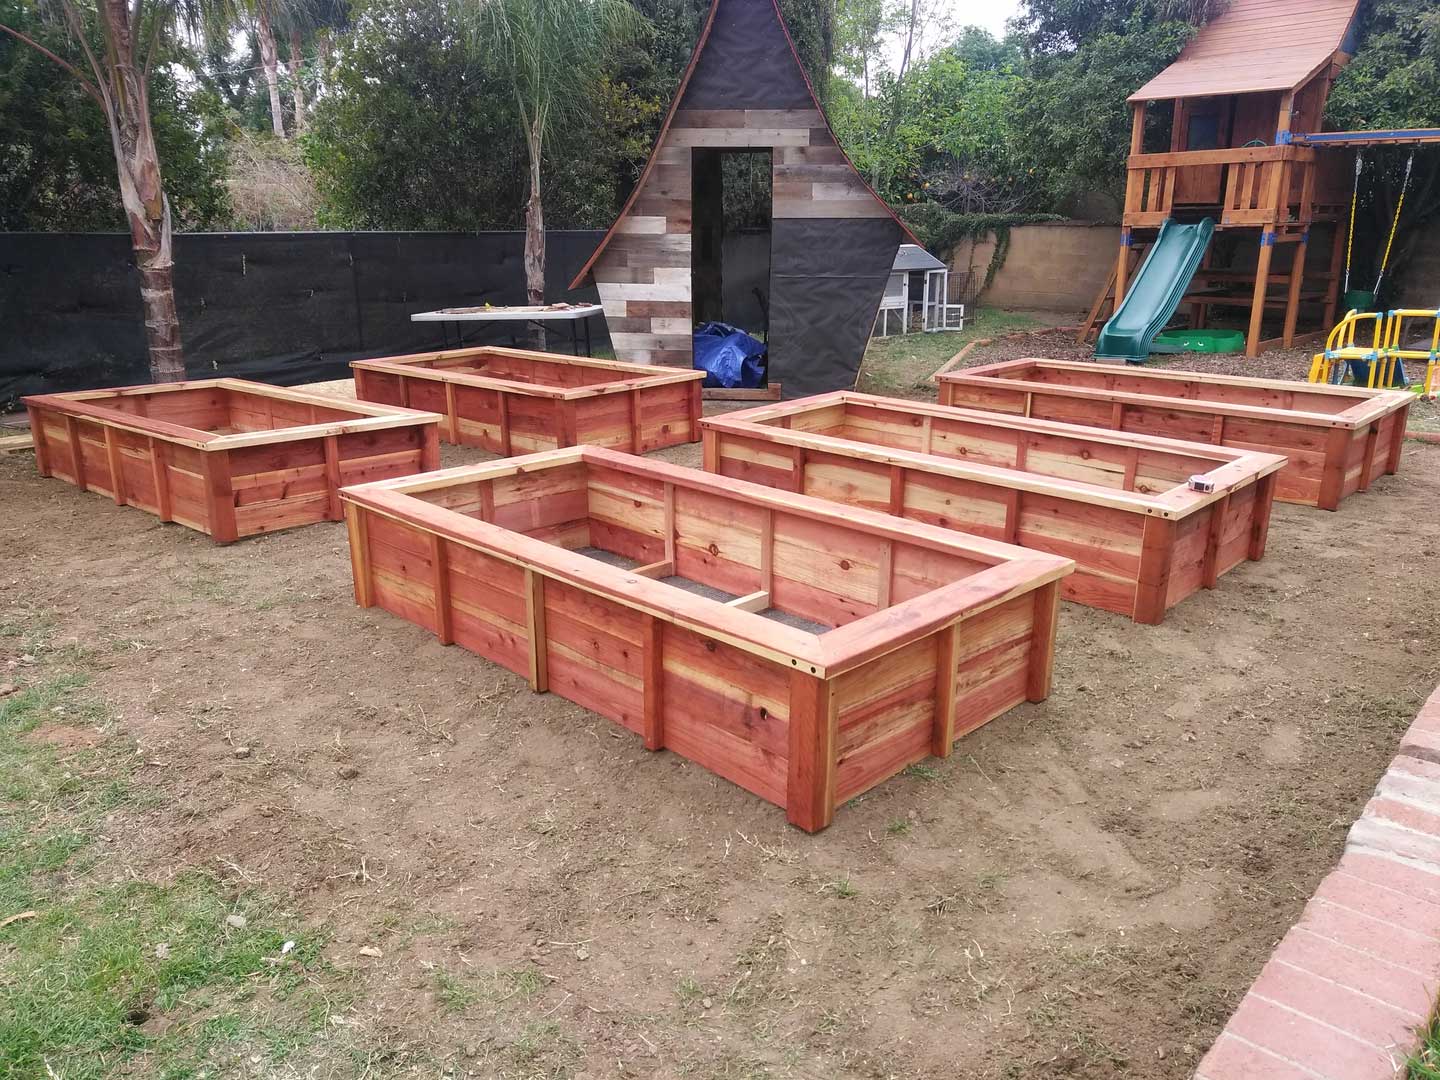 A group of wooden boxes in the dirt.